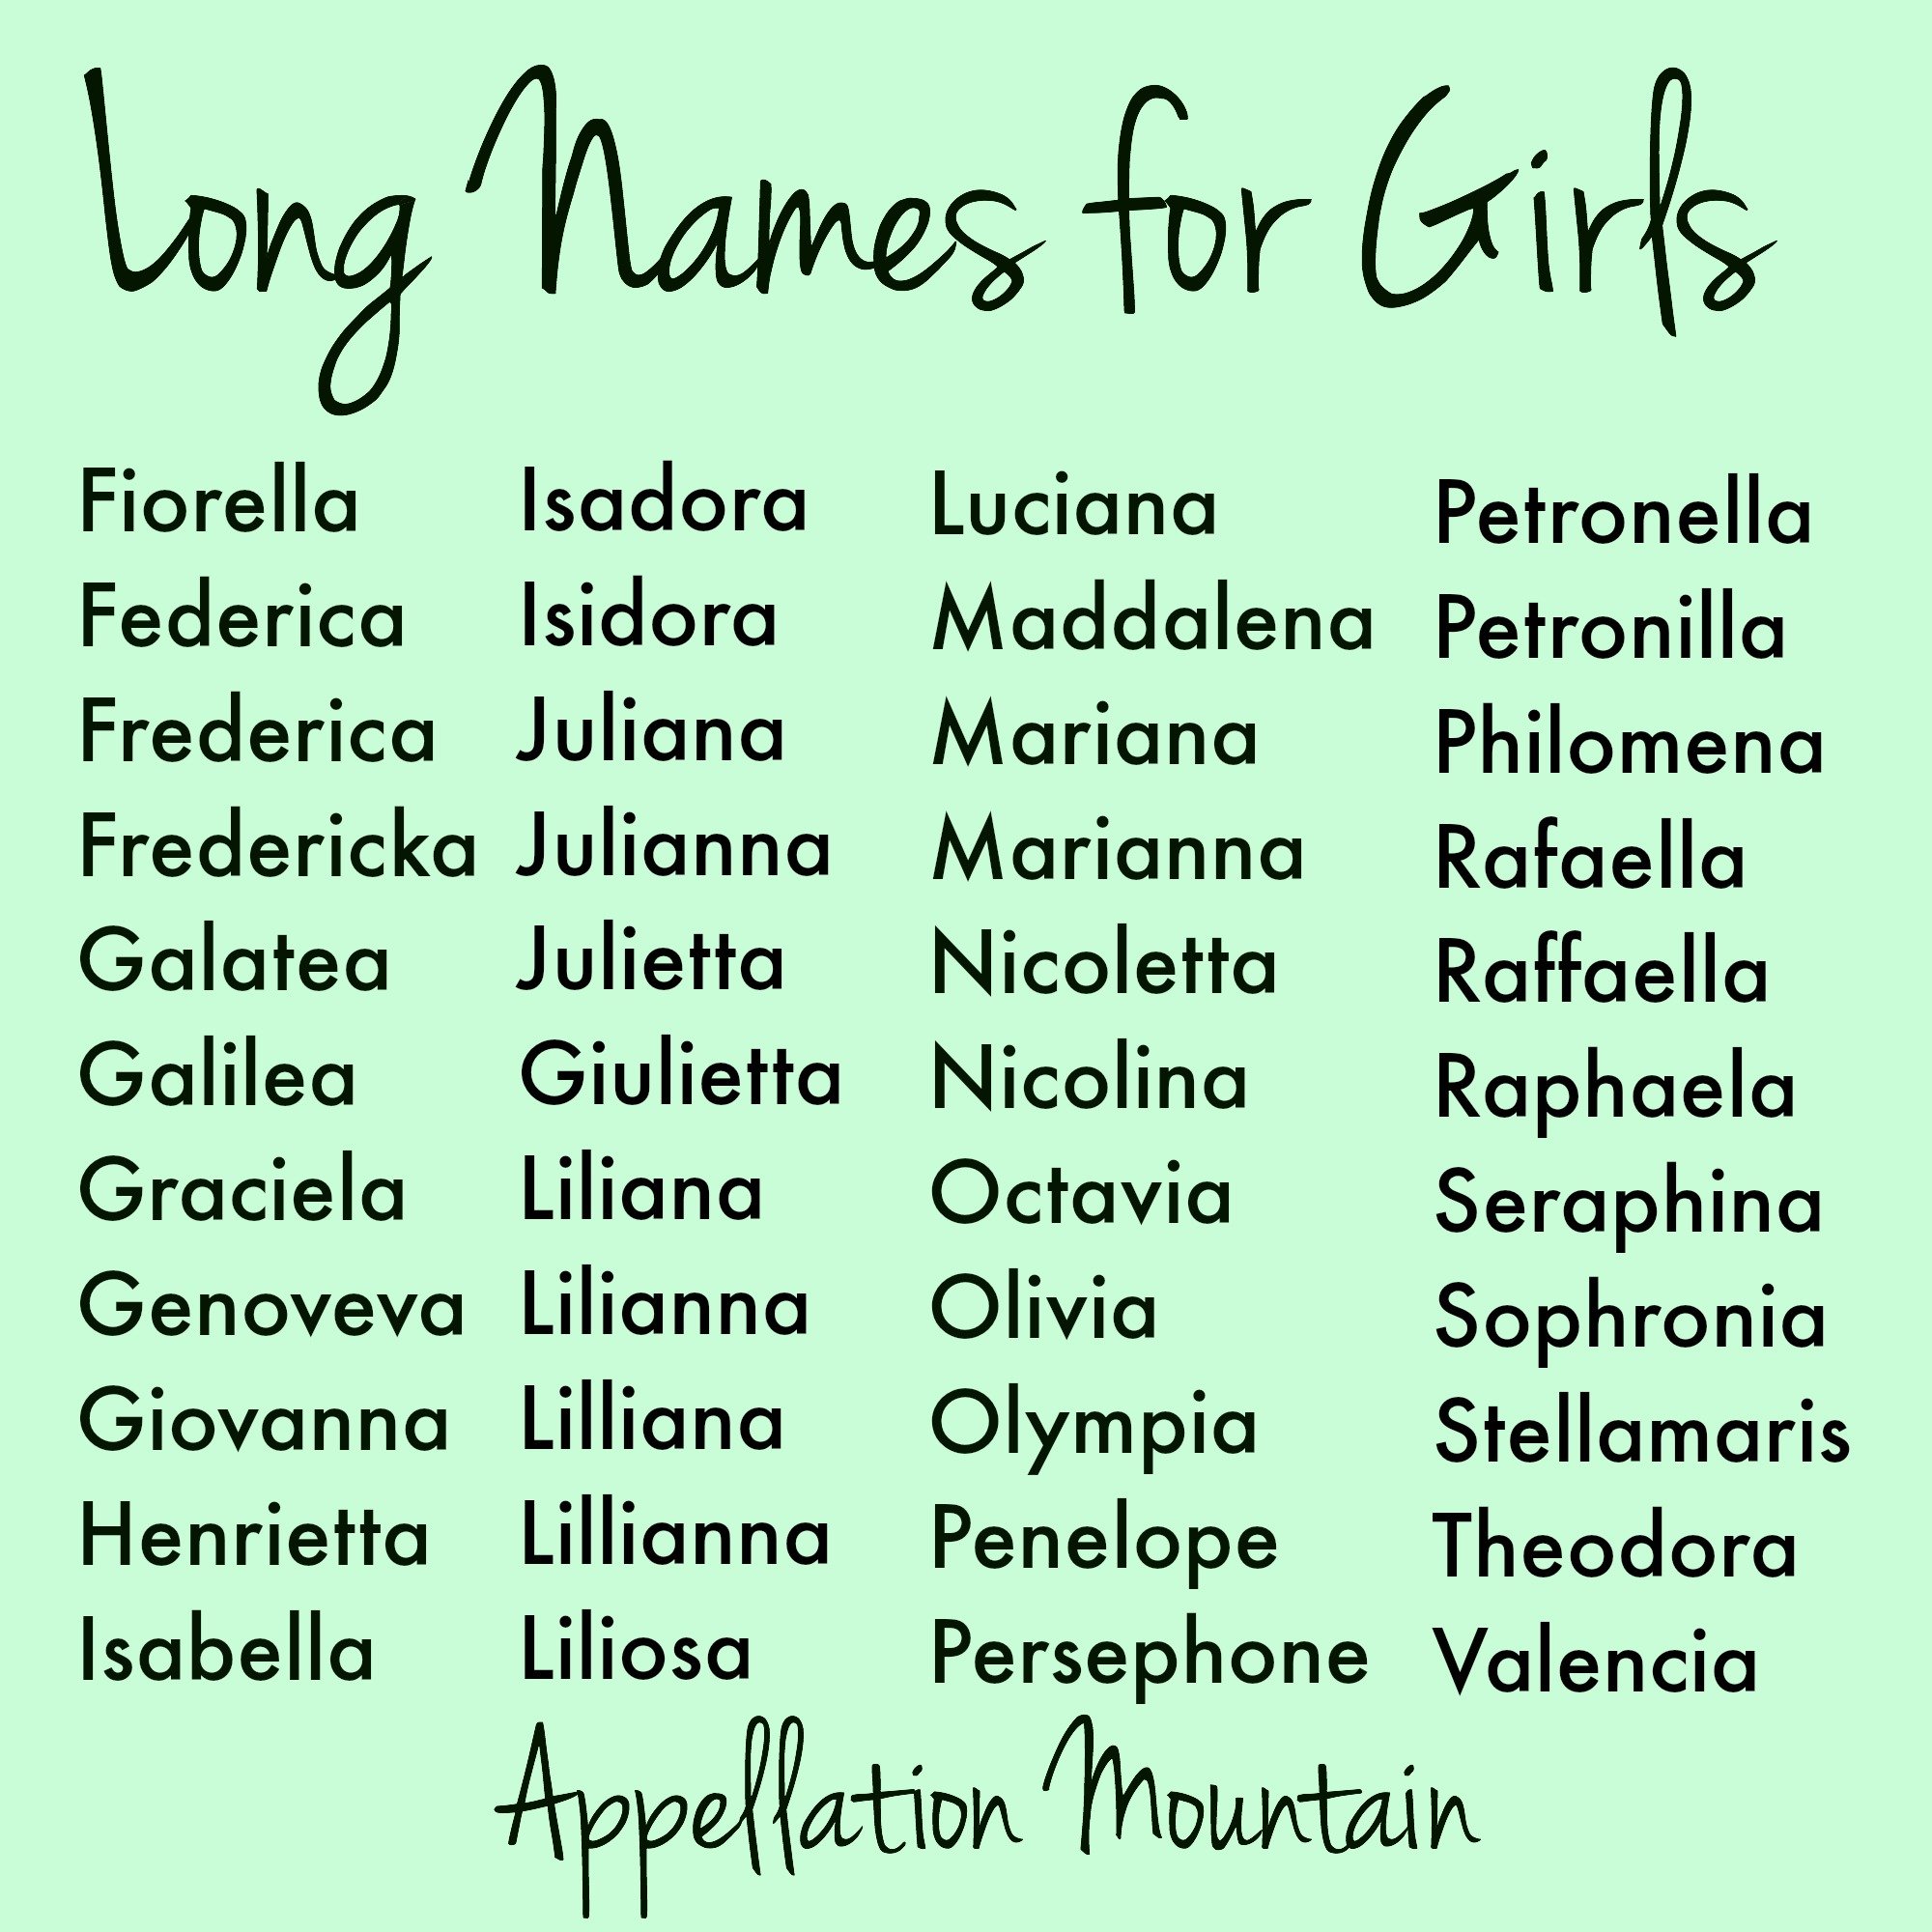 Long Names for Girls Elizabella and Anneliese Appellation Mountain